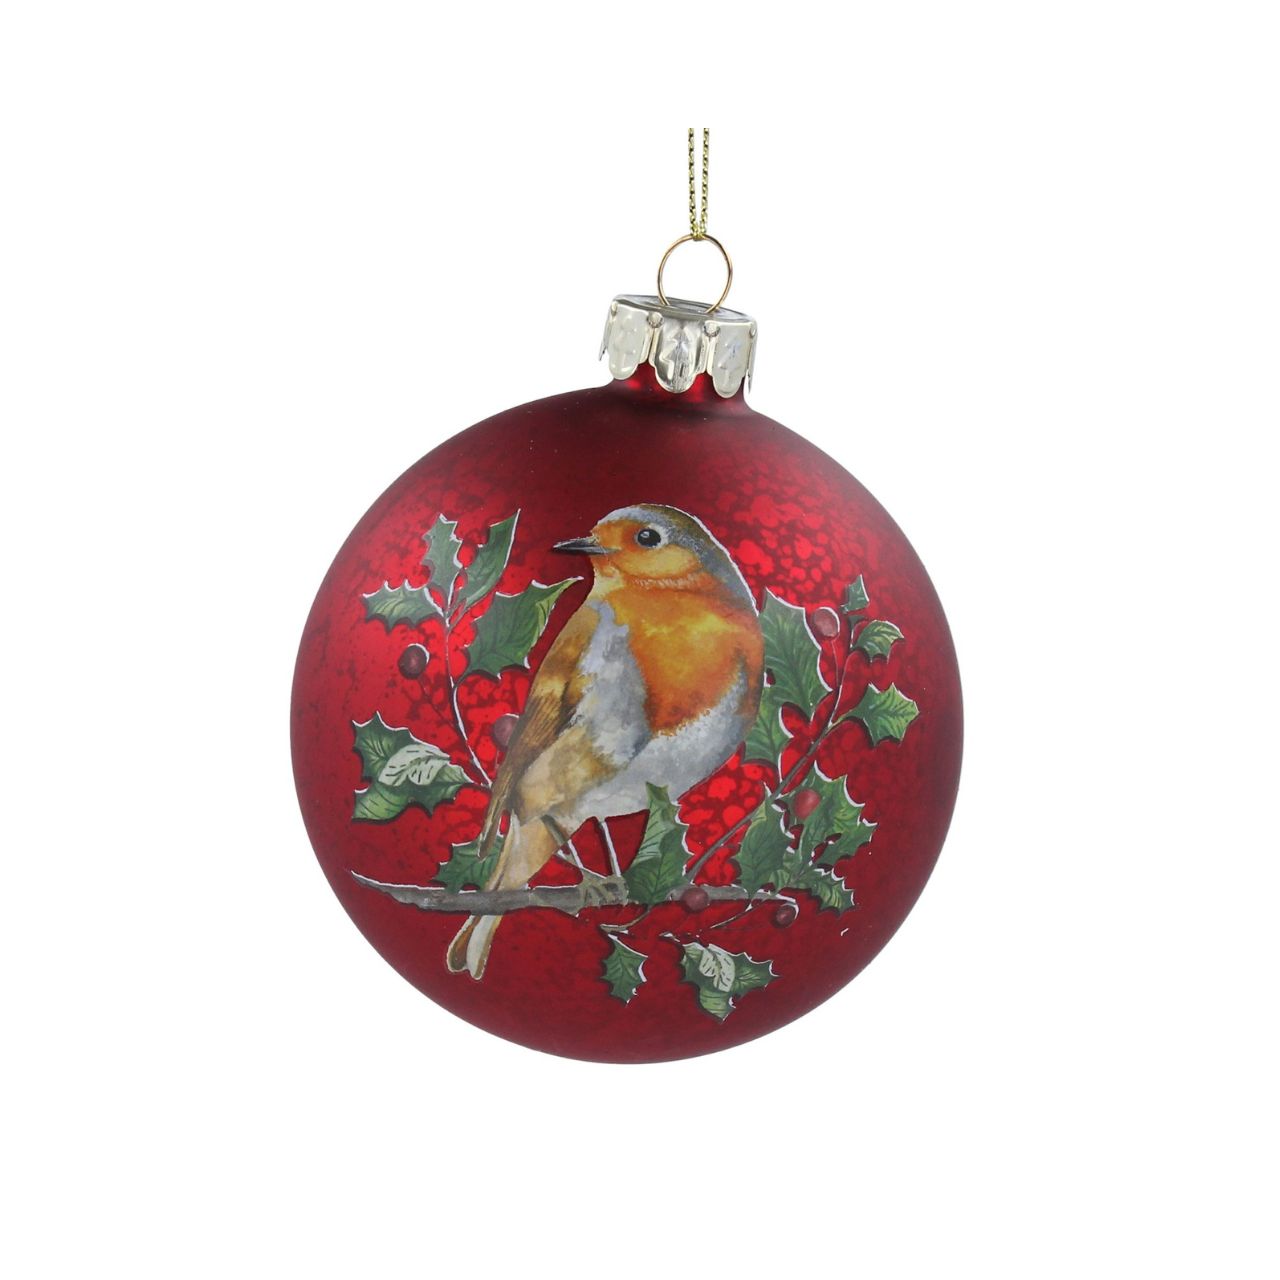 Gisela Graham Christmas Baubles - Antique Red with Robin Large  This Gisela Graham Christmas Baubles is perfect for your festive holiday décor. Featuring an Antique Red glaze and a beautiful painted Robin design, these classic decorations will bring a subtle elegance to your tree this season.